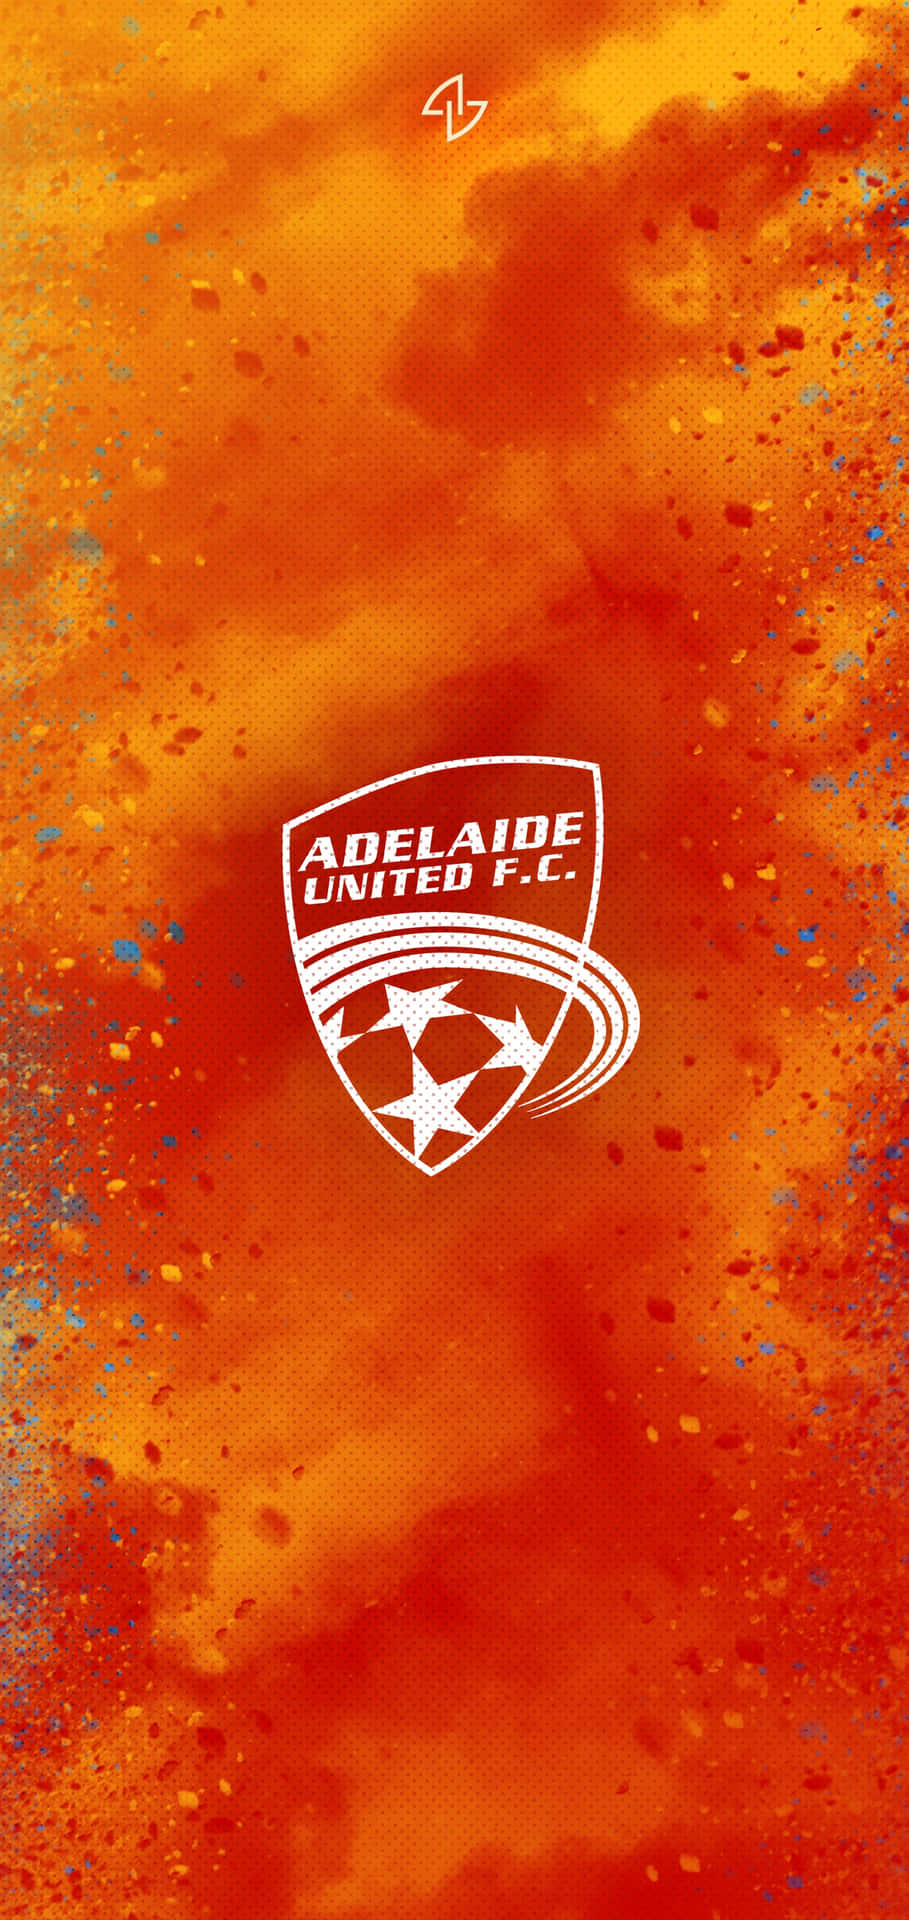 Adelaide United Players Celebrating a Goal Wallpaper